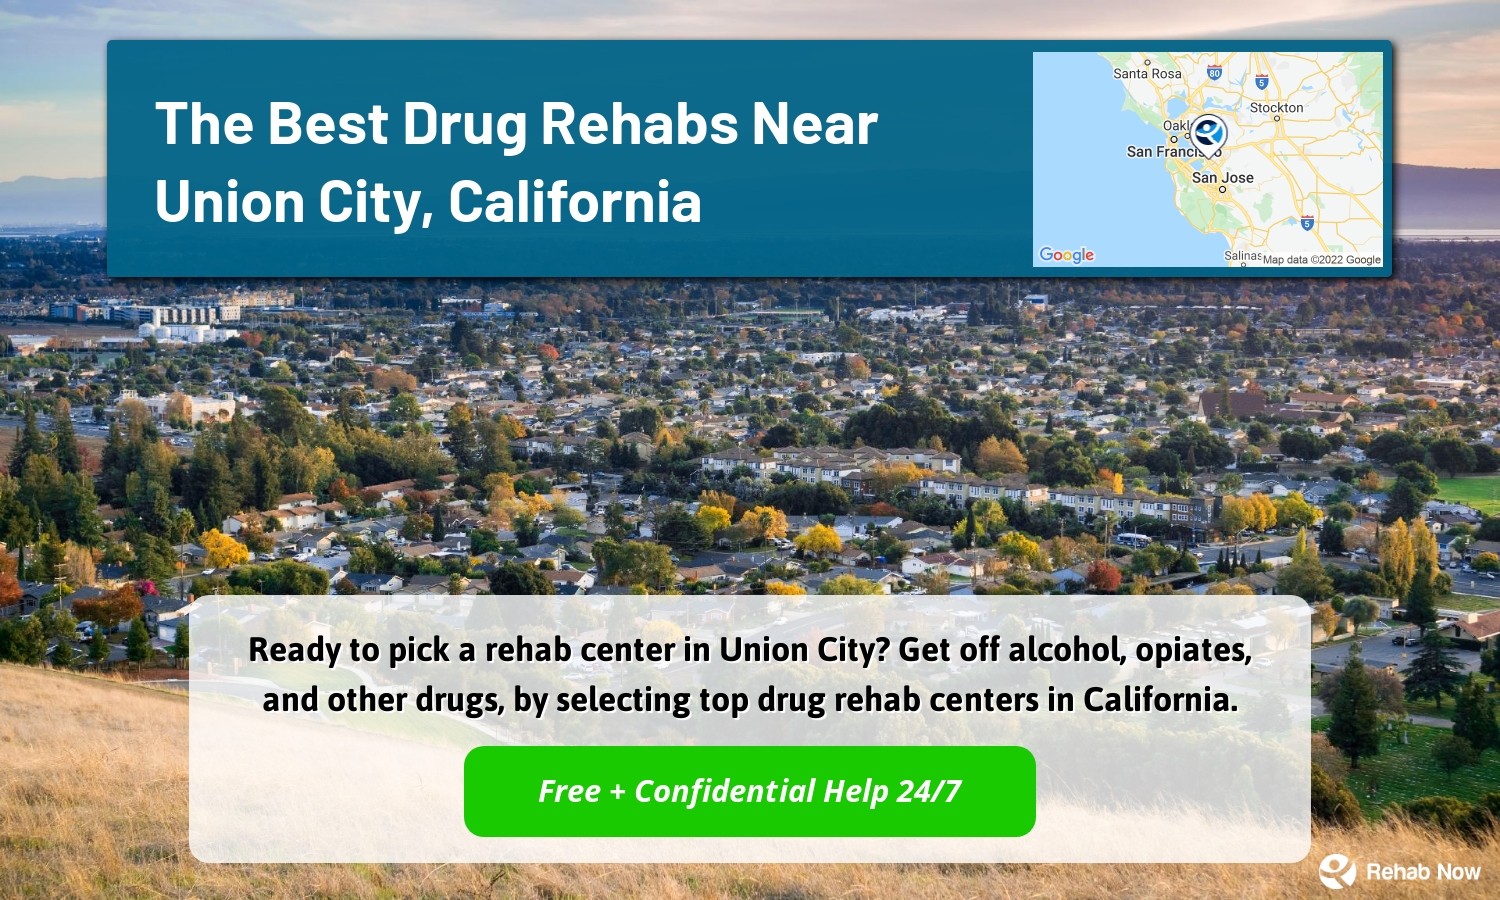 Ready to pick a rehab center in Union City? Get off alcohol, opiates, and other drugs, by selecting top drug rehab centers in California.